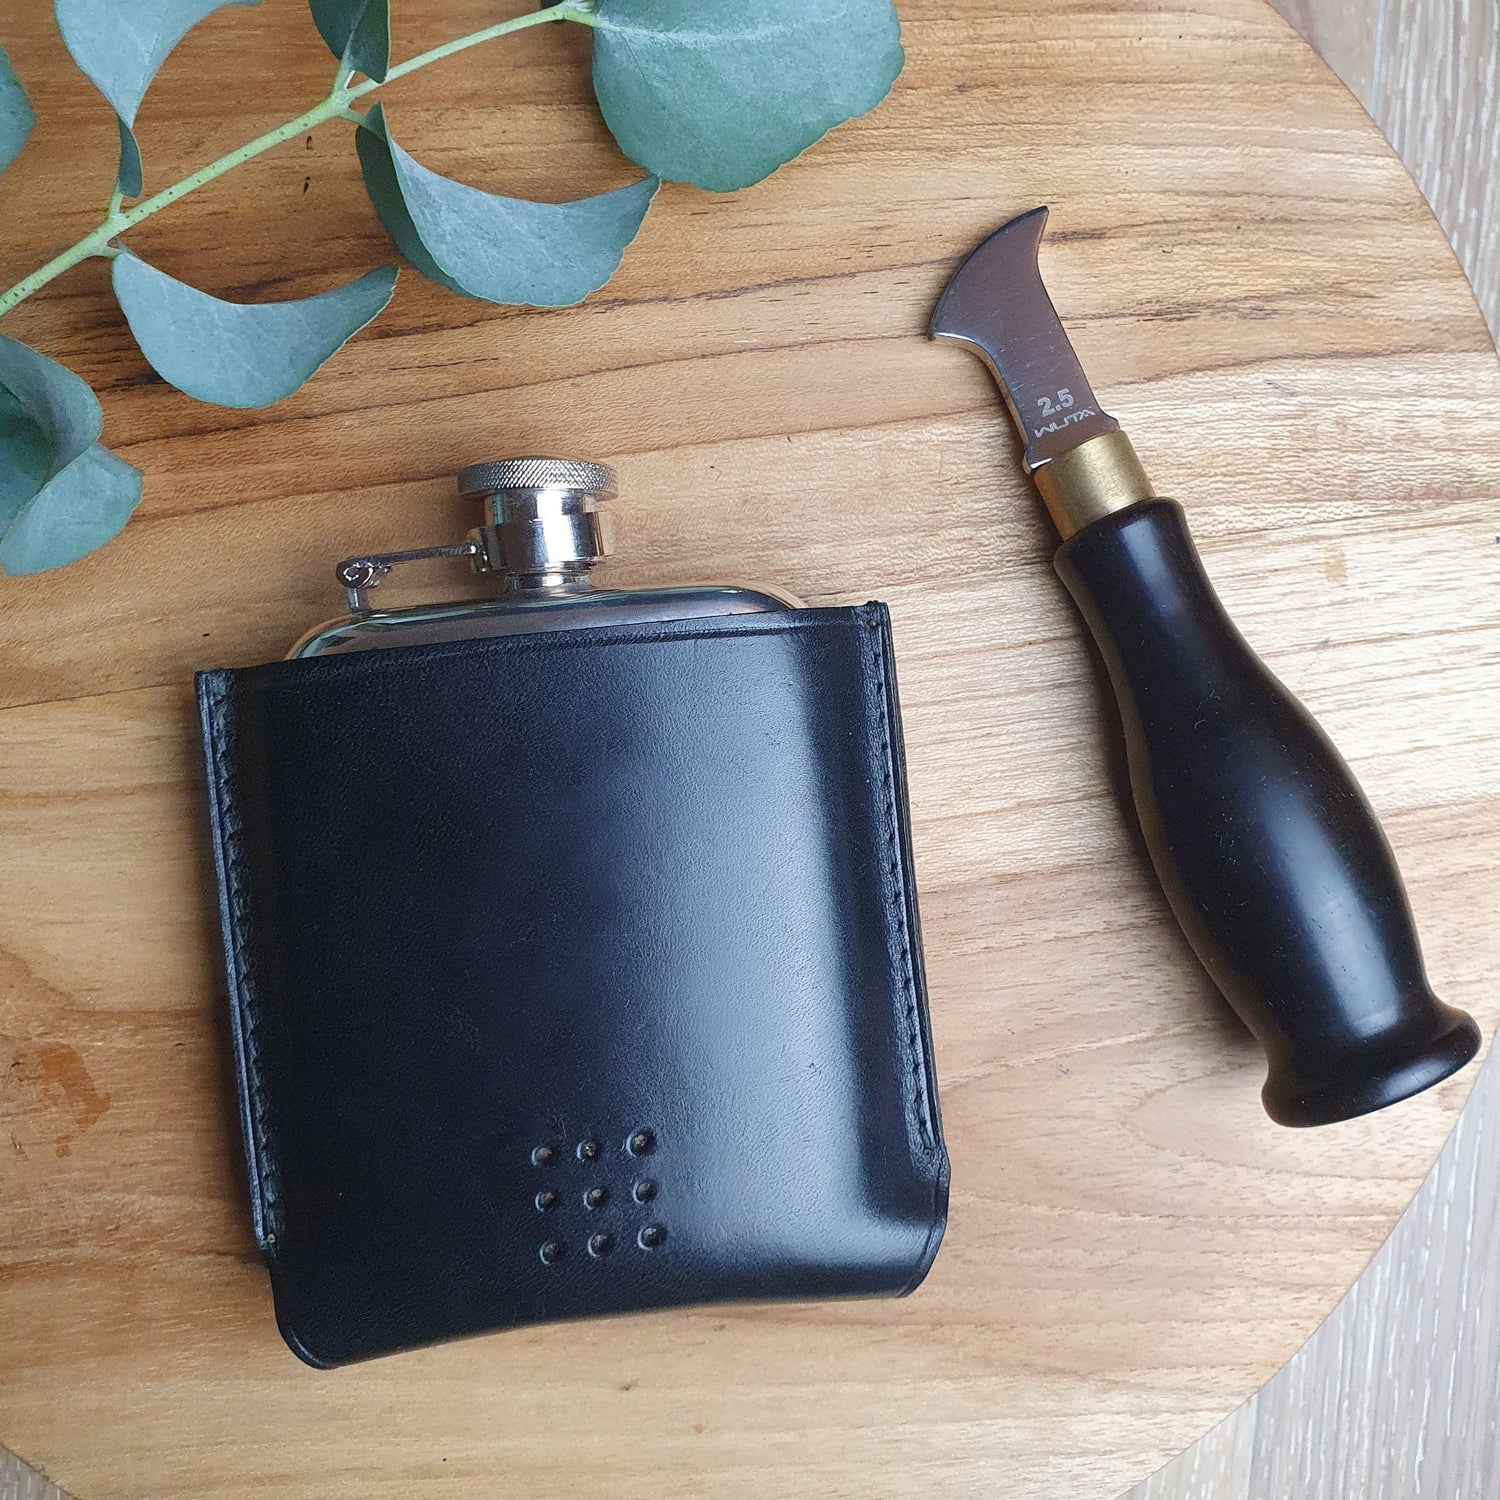 Hands of Tym Flasks 'Aspen' Rounded Pewter Hip Flask with Bespoke Handmade Leather case